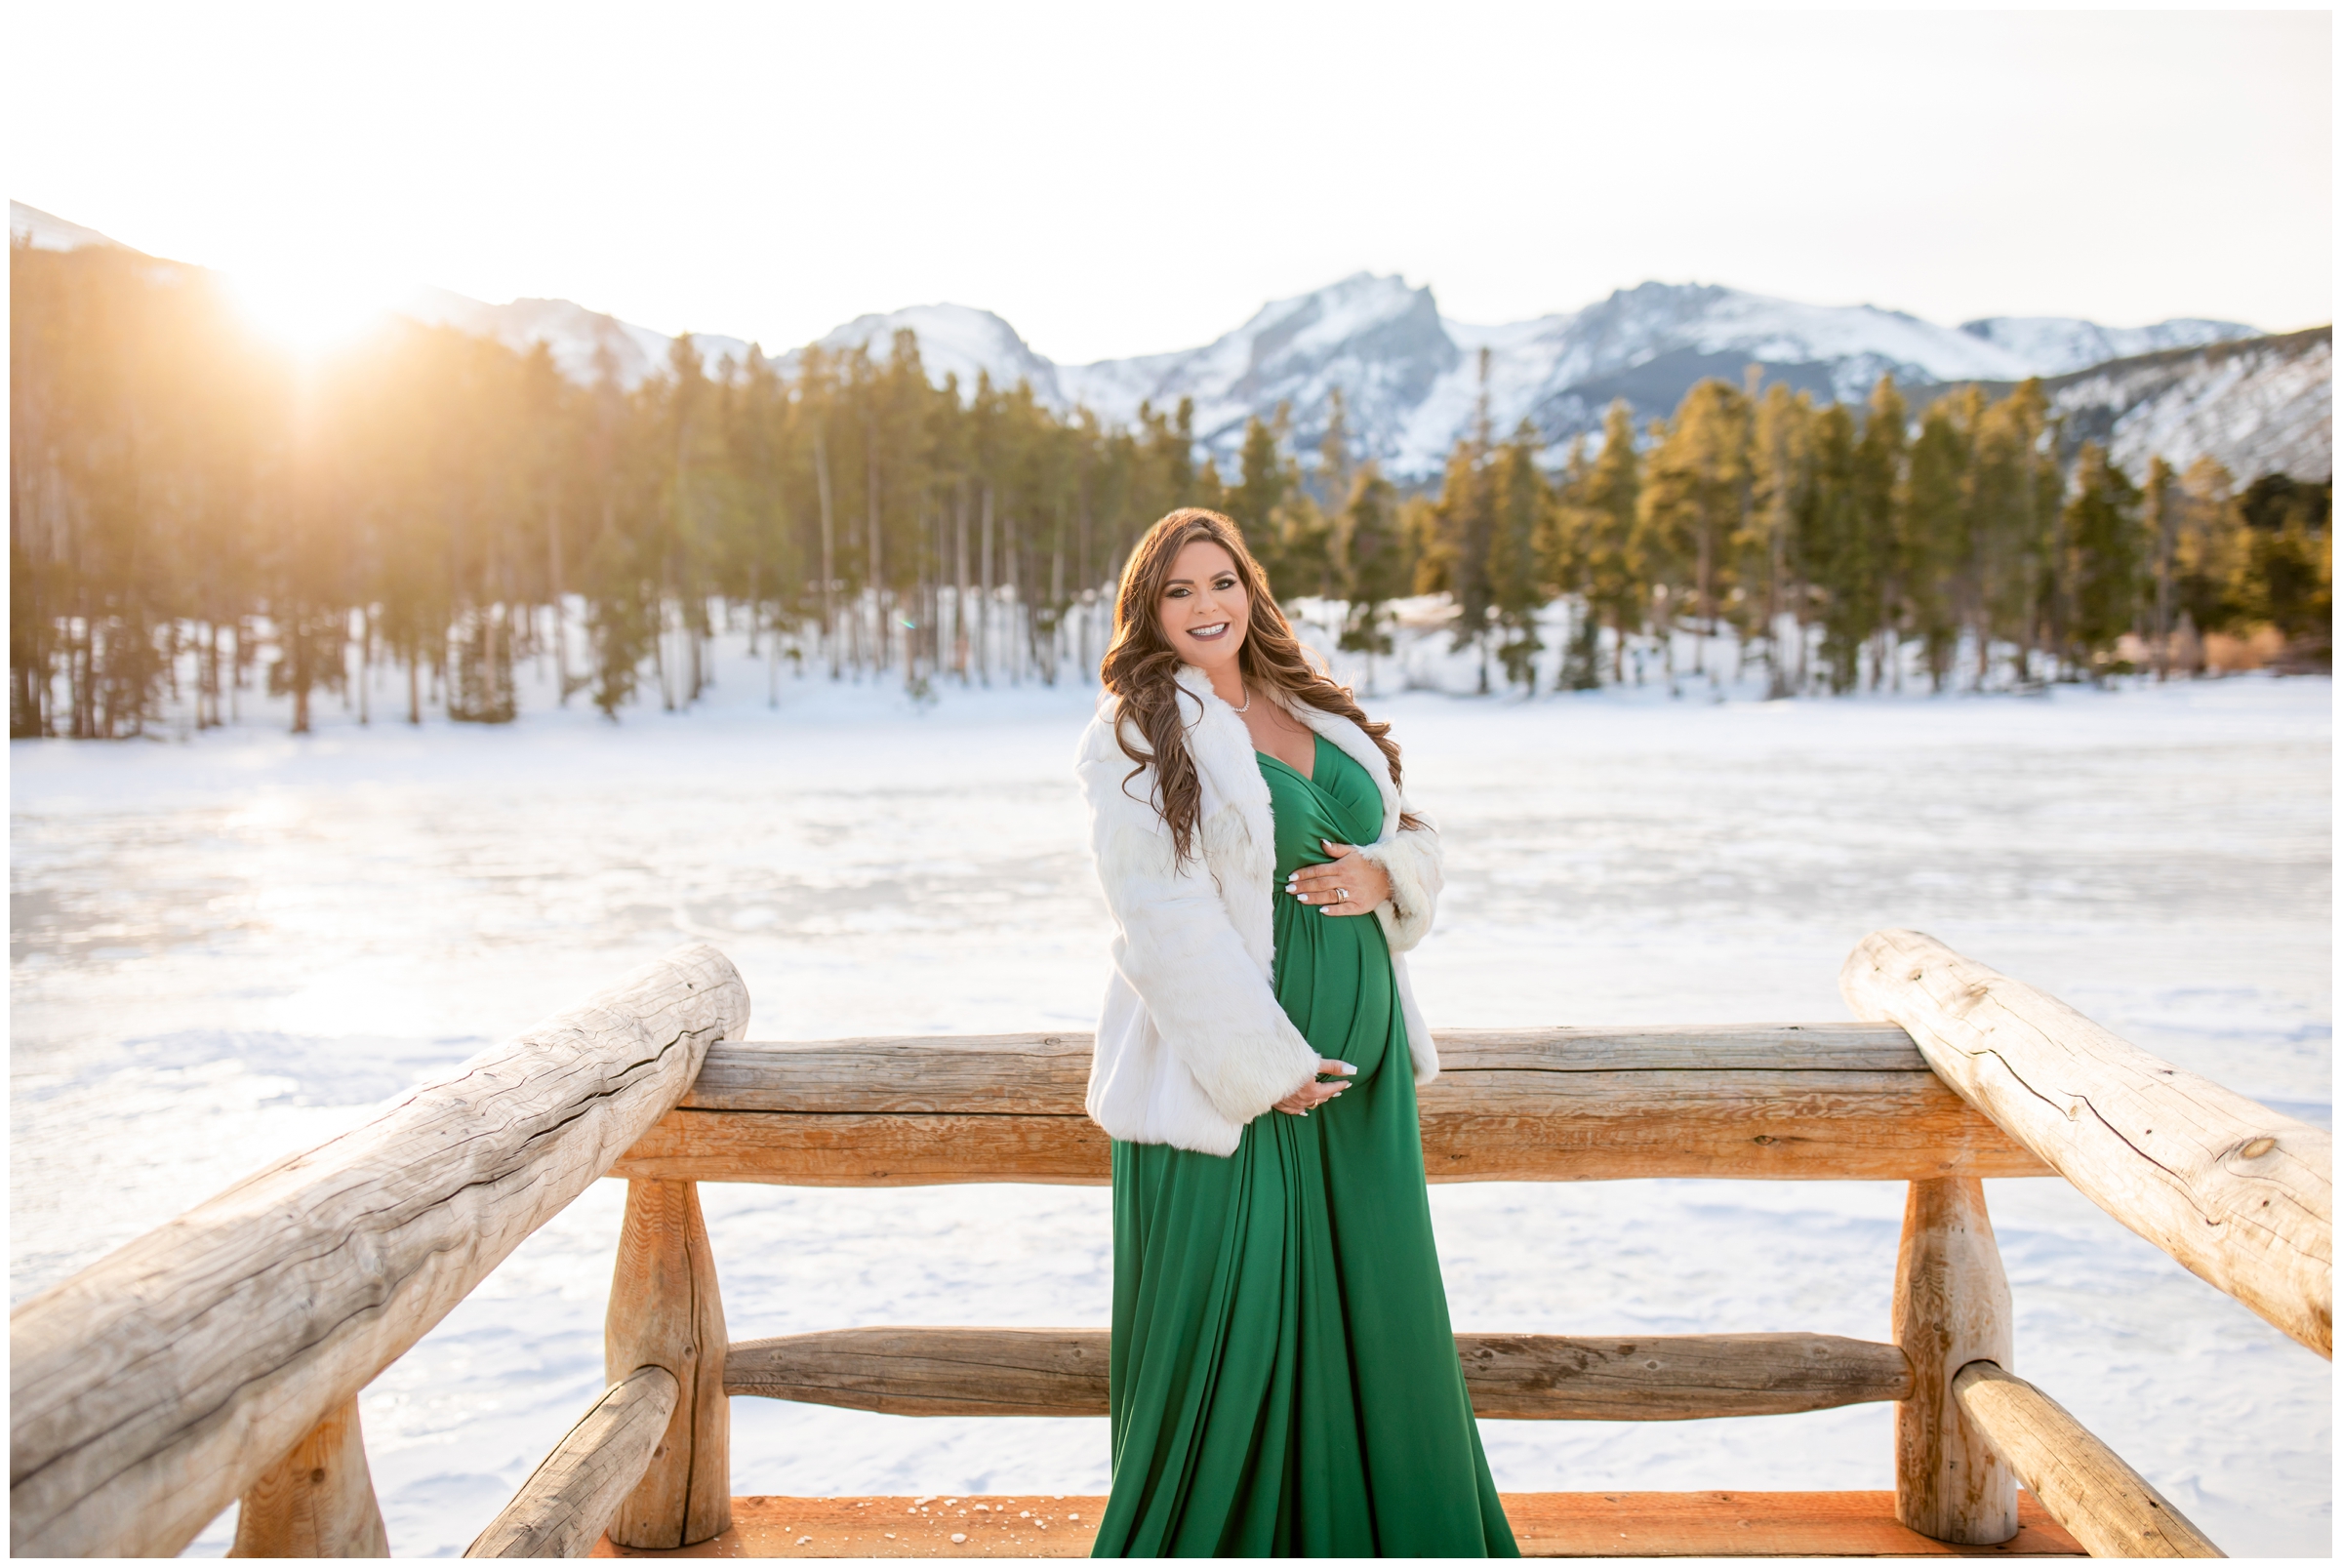 Colorado winter maternity photography at Sprague Lake in Rocky Mountain National Park by Estes Park photographer Plum Pretty Photography